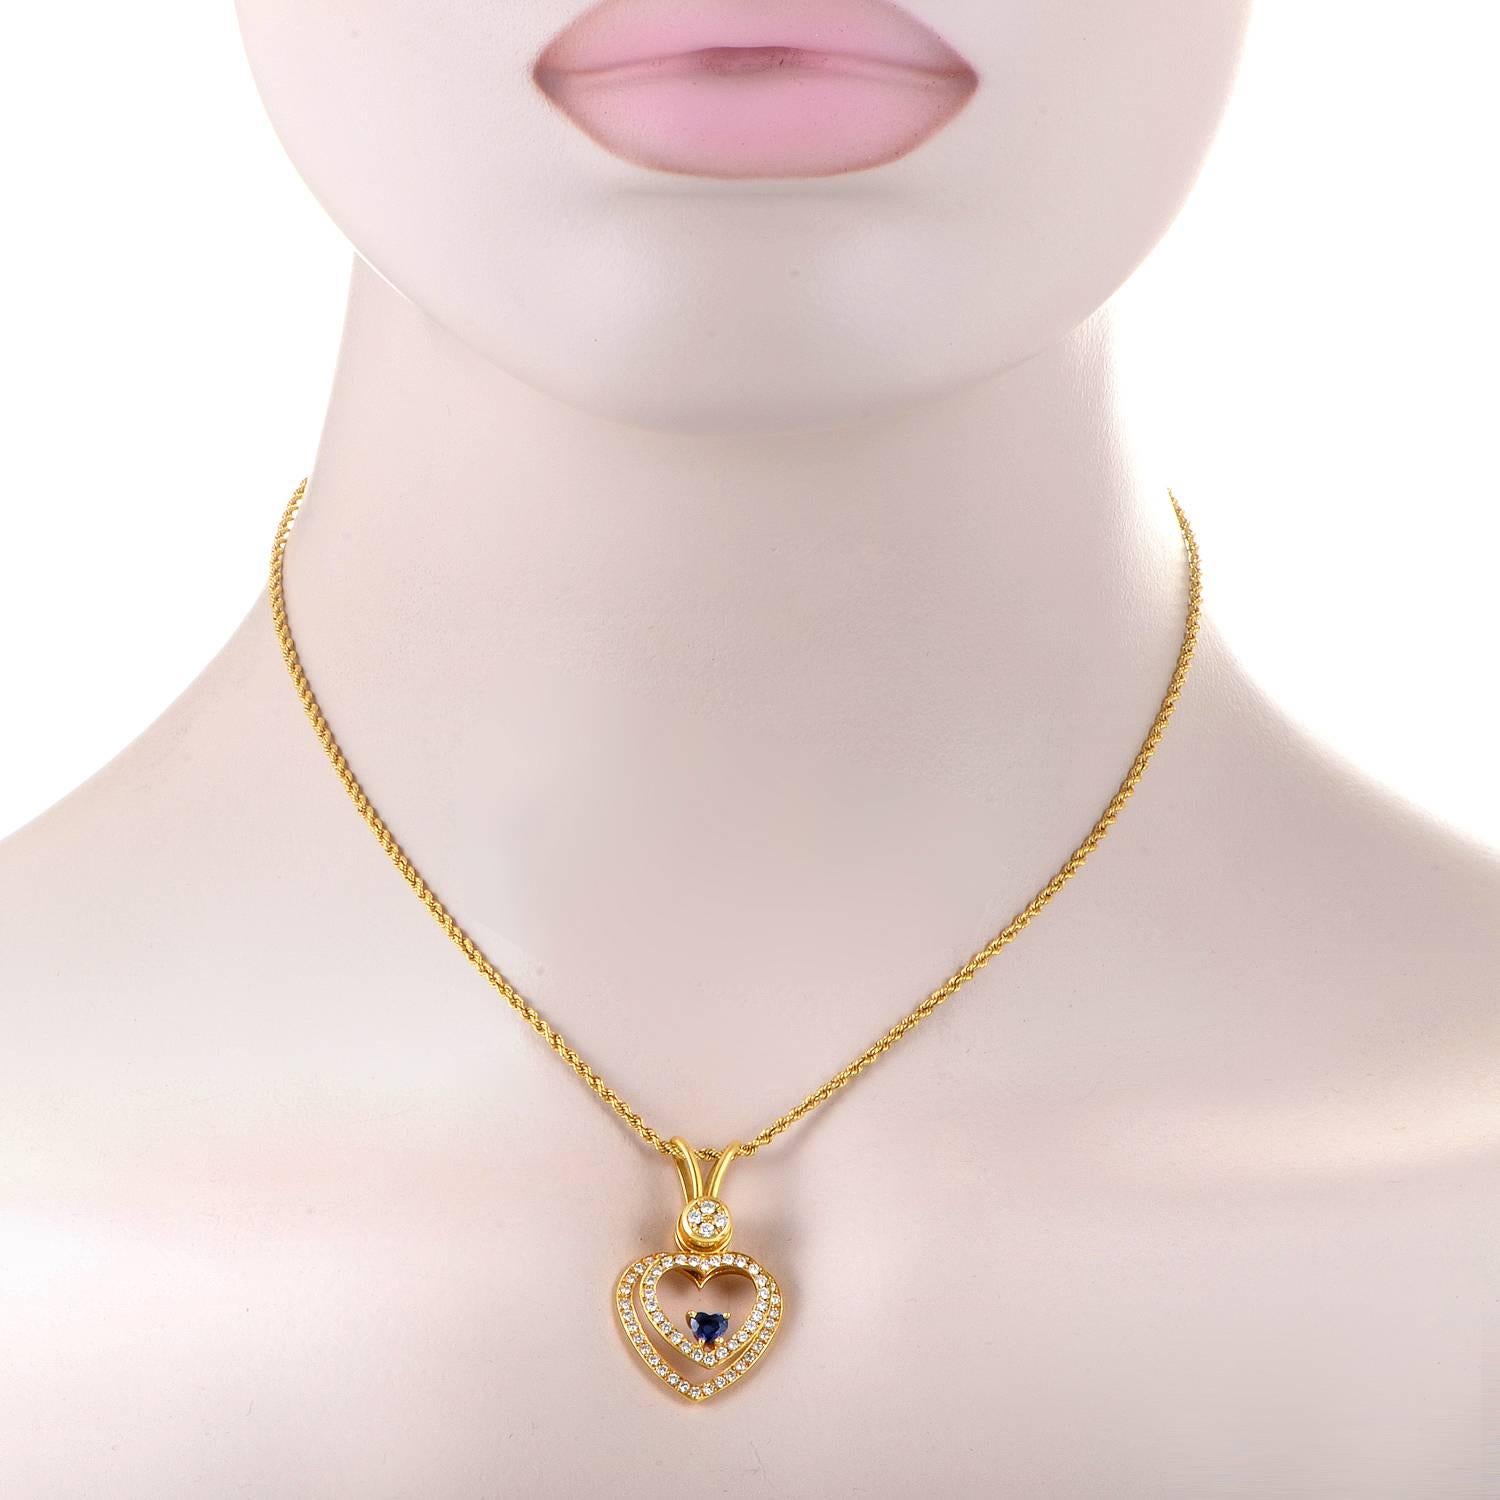 Producing an irresistible romantic allure through the meaningful symbol of a heart in the design of the pendant as well as the glamorous blend of 18K yellow gold and glittering diamonds totaling approximately 1.00 carats, this spellbinding necklace